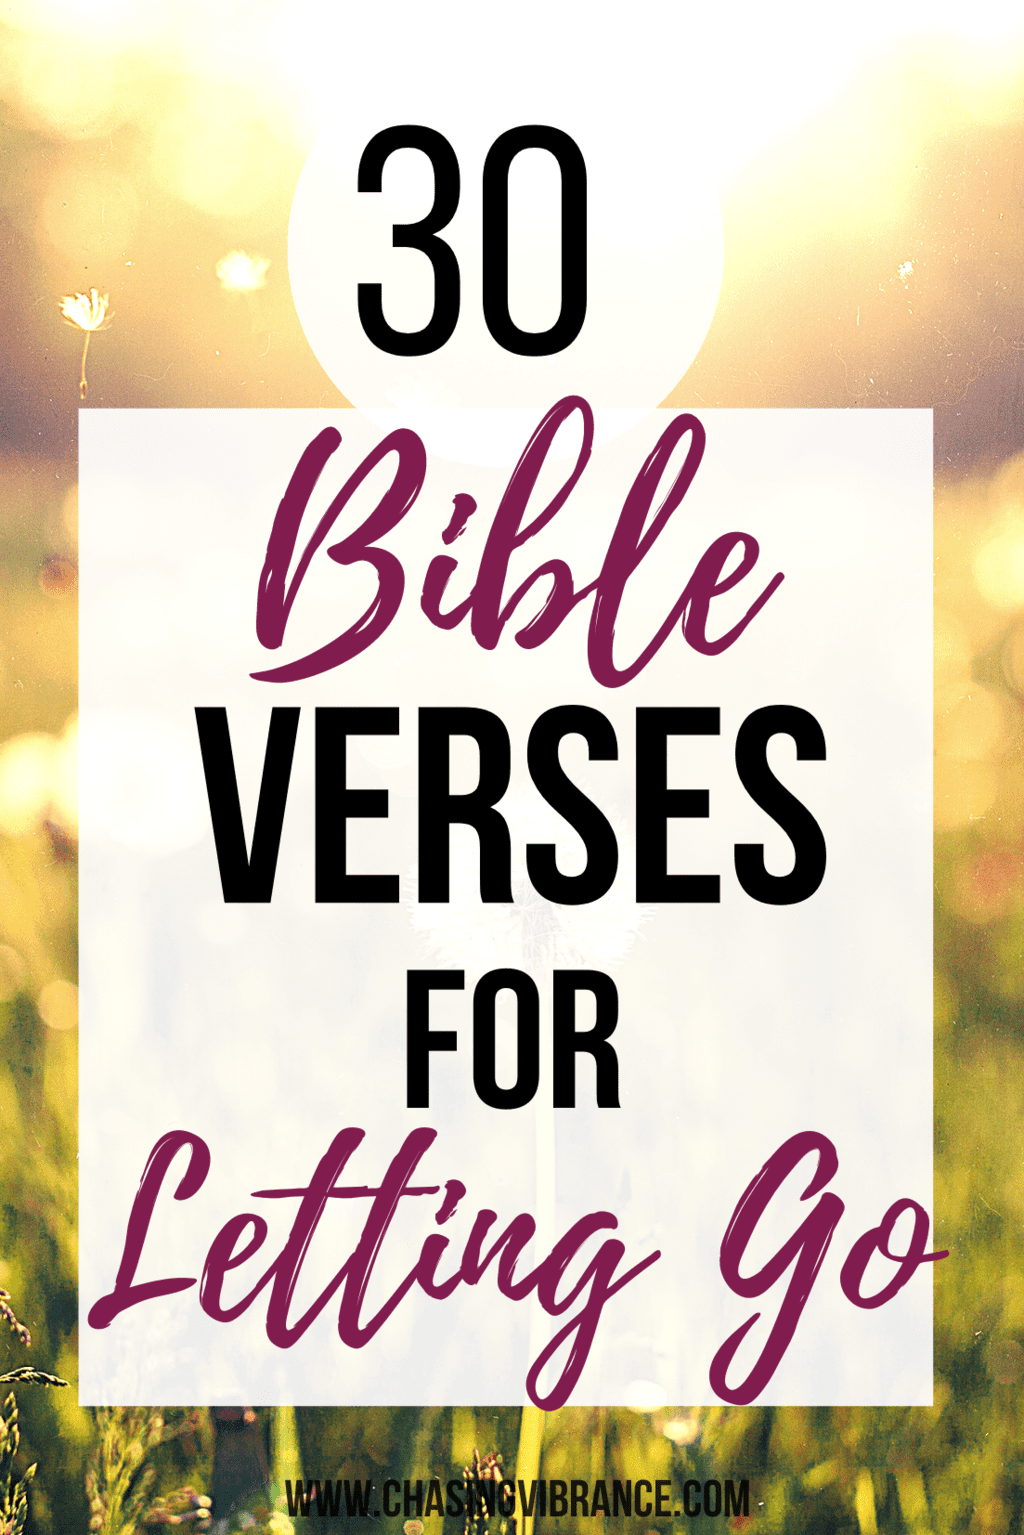 30 Bible Verses for Letting Go